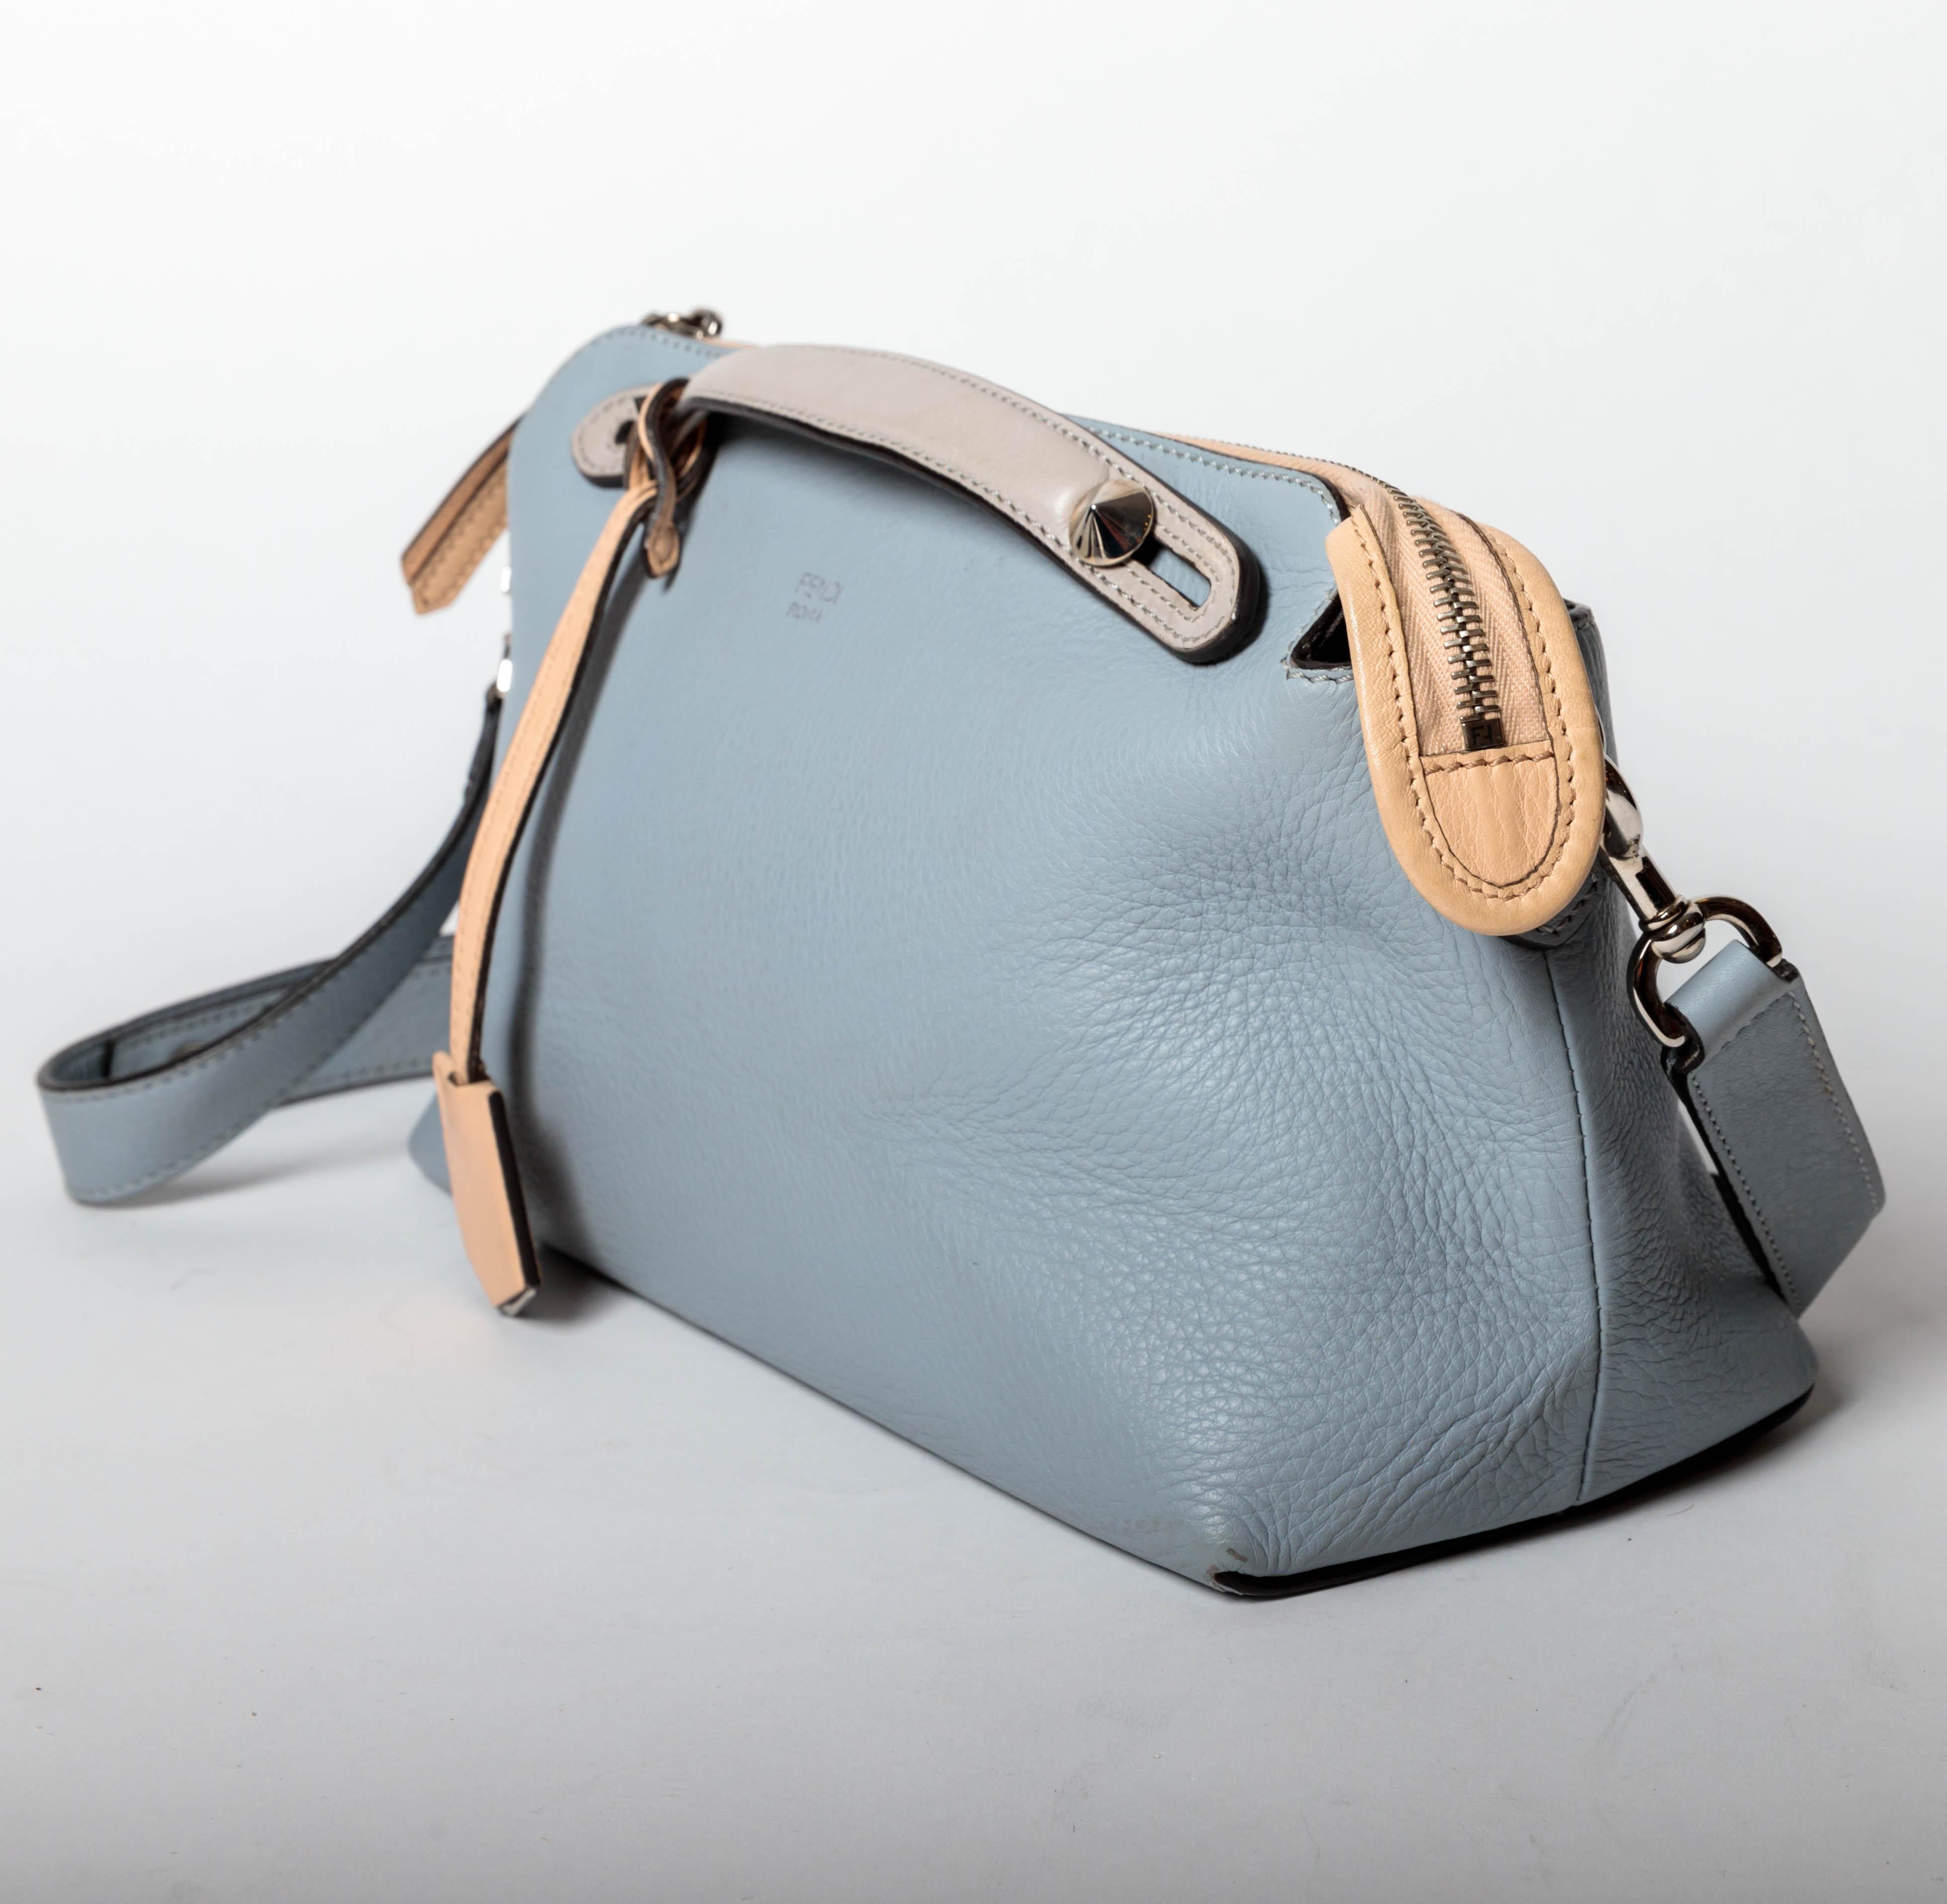 Gray Fendi Top Handle Ice Blue Leather Bag with Detachable Shoulder Strap  For Sale